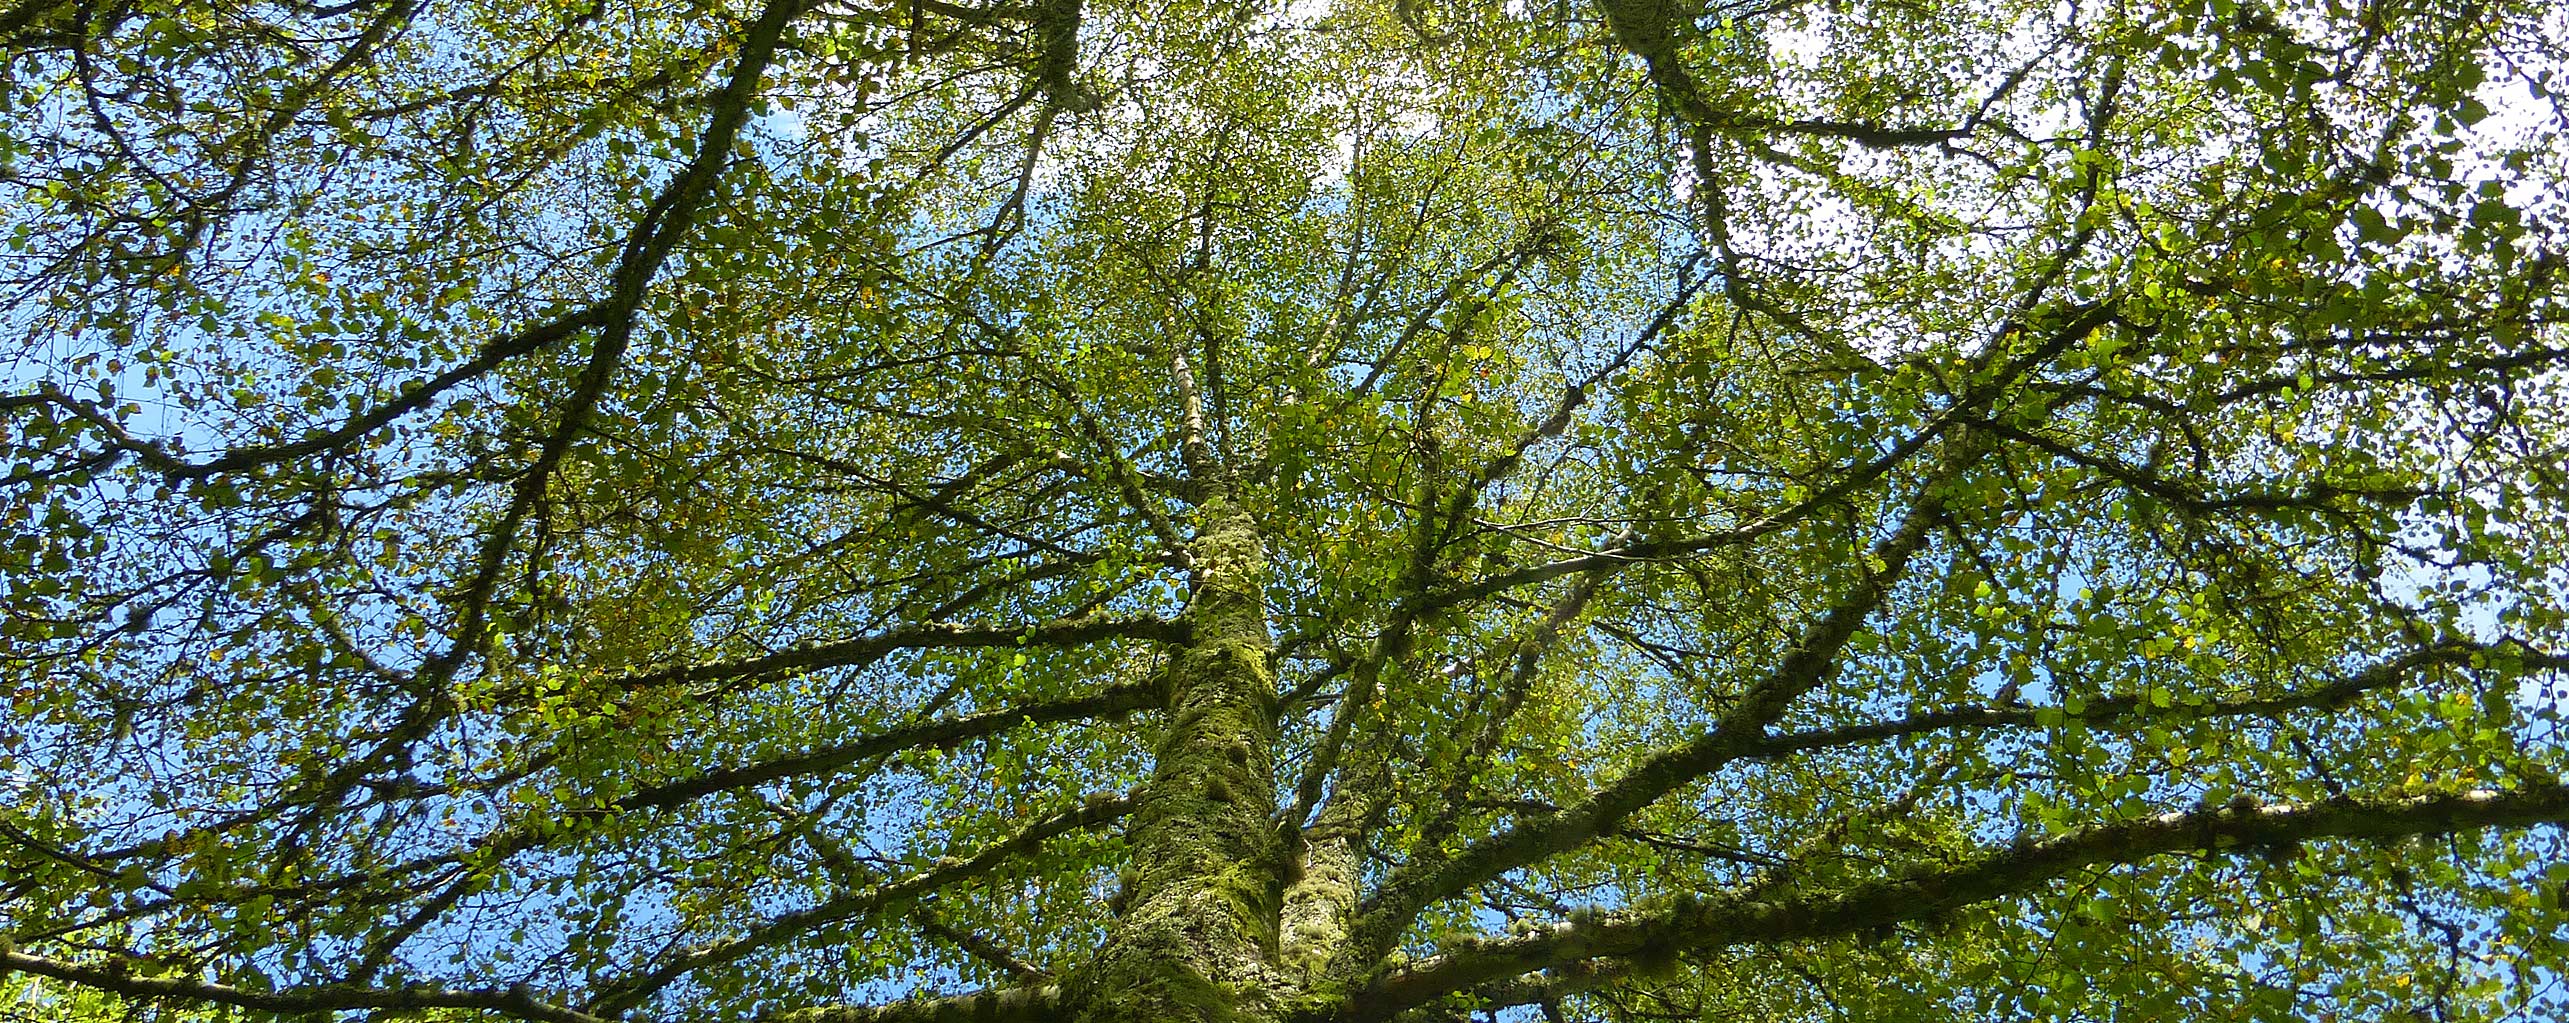 Looking up throught the trees at Sychpant Woods